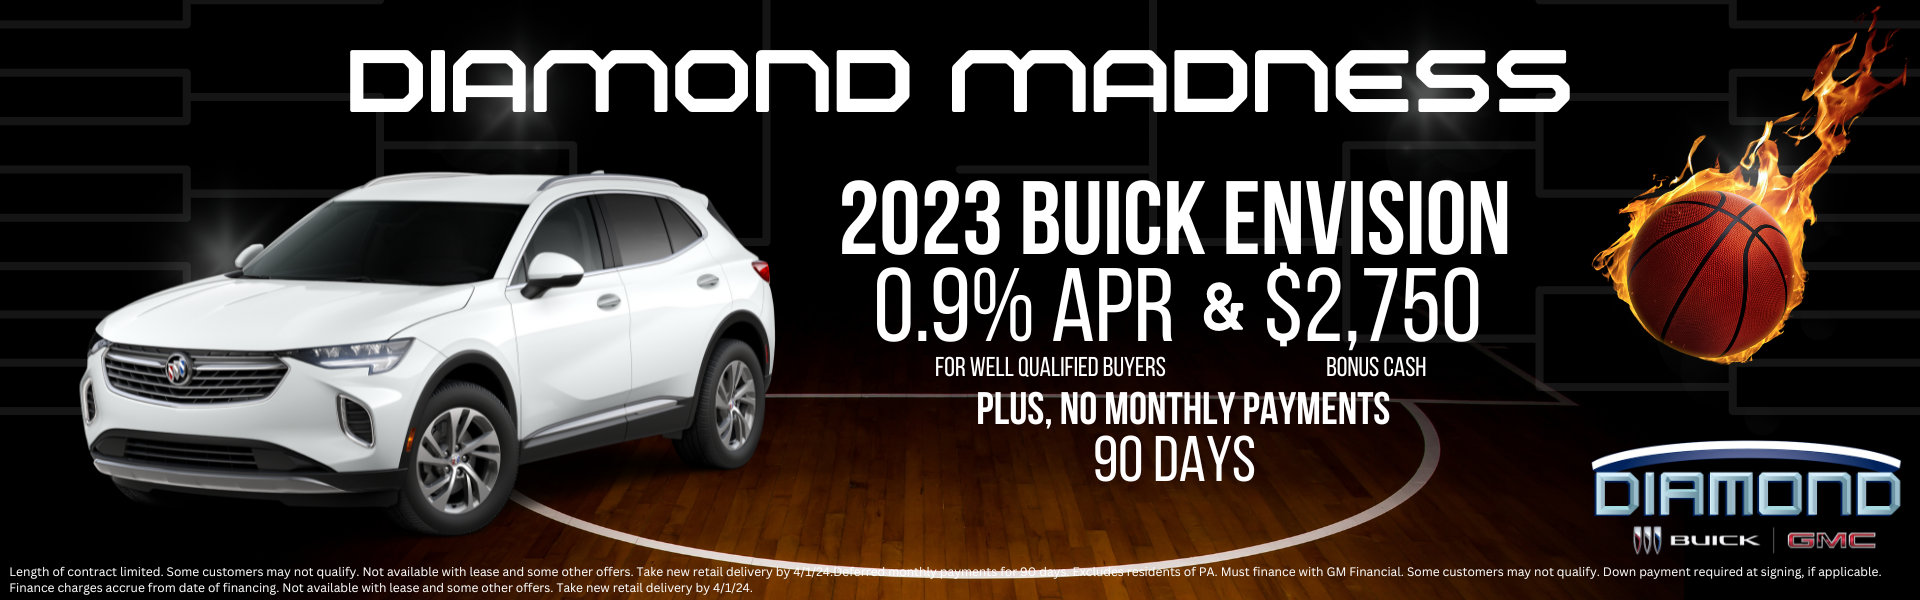 0.9% APR and $2,750 bonus cash on New Buick Envision